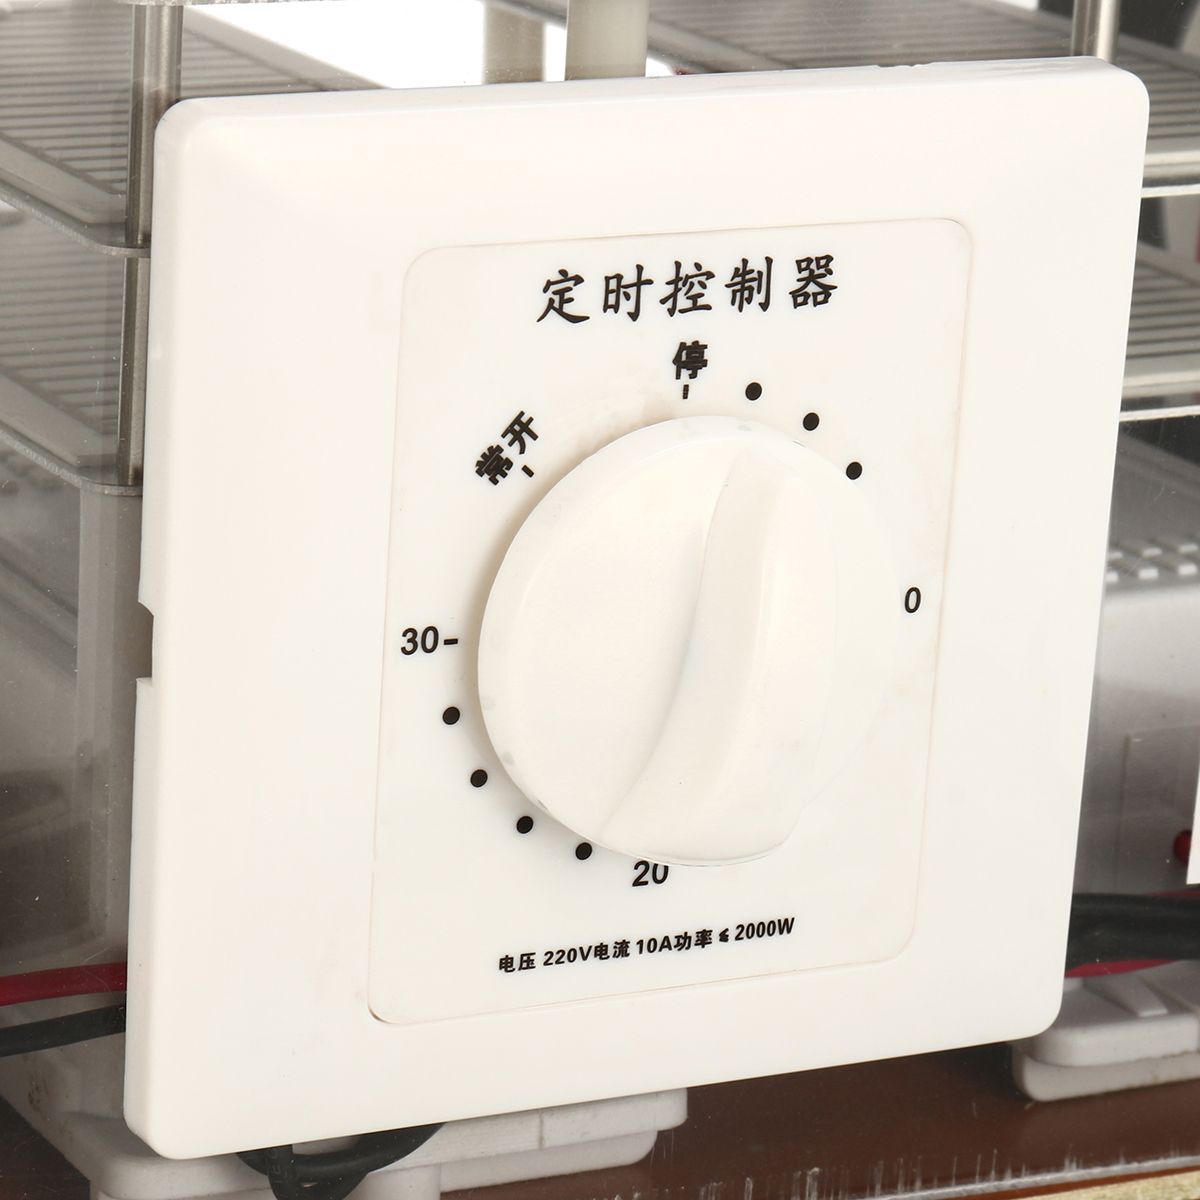 30gh-50gh-220V-Air-Ozone-Generator-Air-Purifier-Sterilizer-With-Timing-Switch-for-Home-Car-Office-Me-1290170